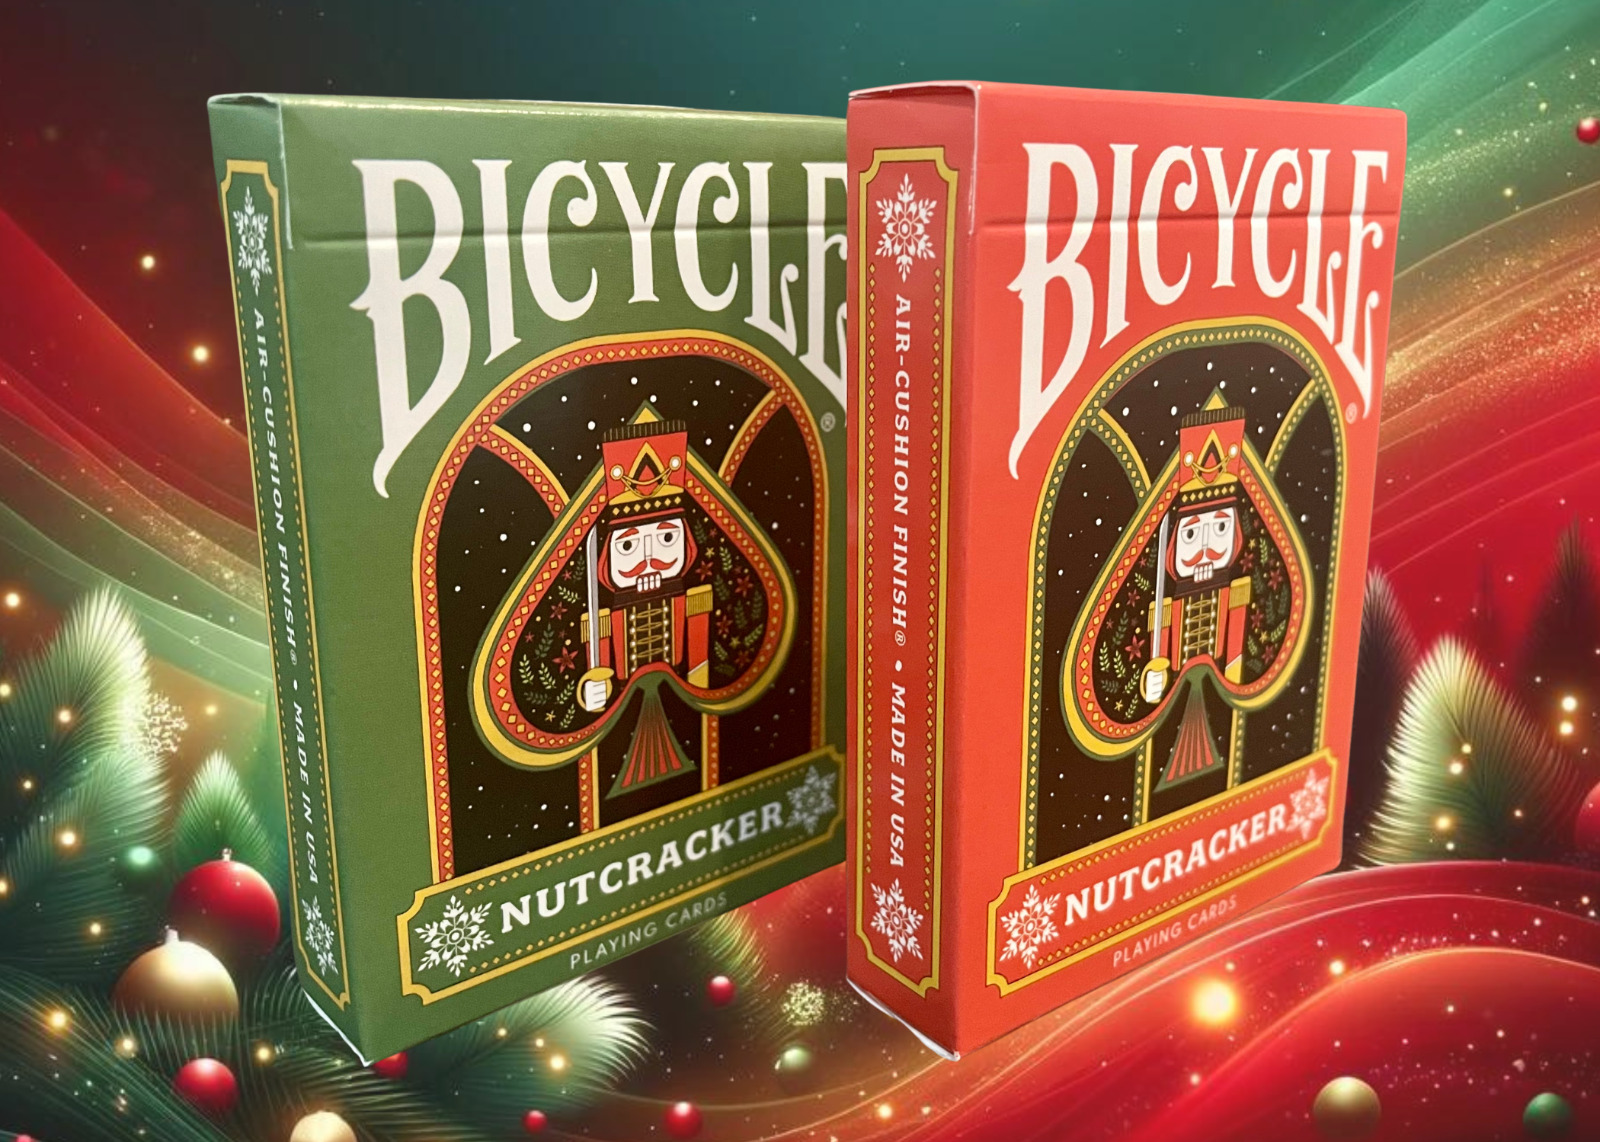 Nutcracker Bicycle Playing Cards - 2 Deck Set